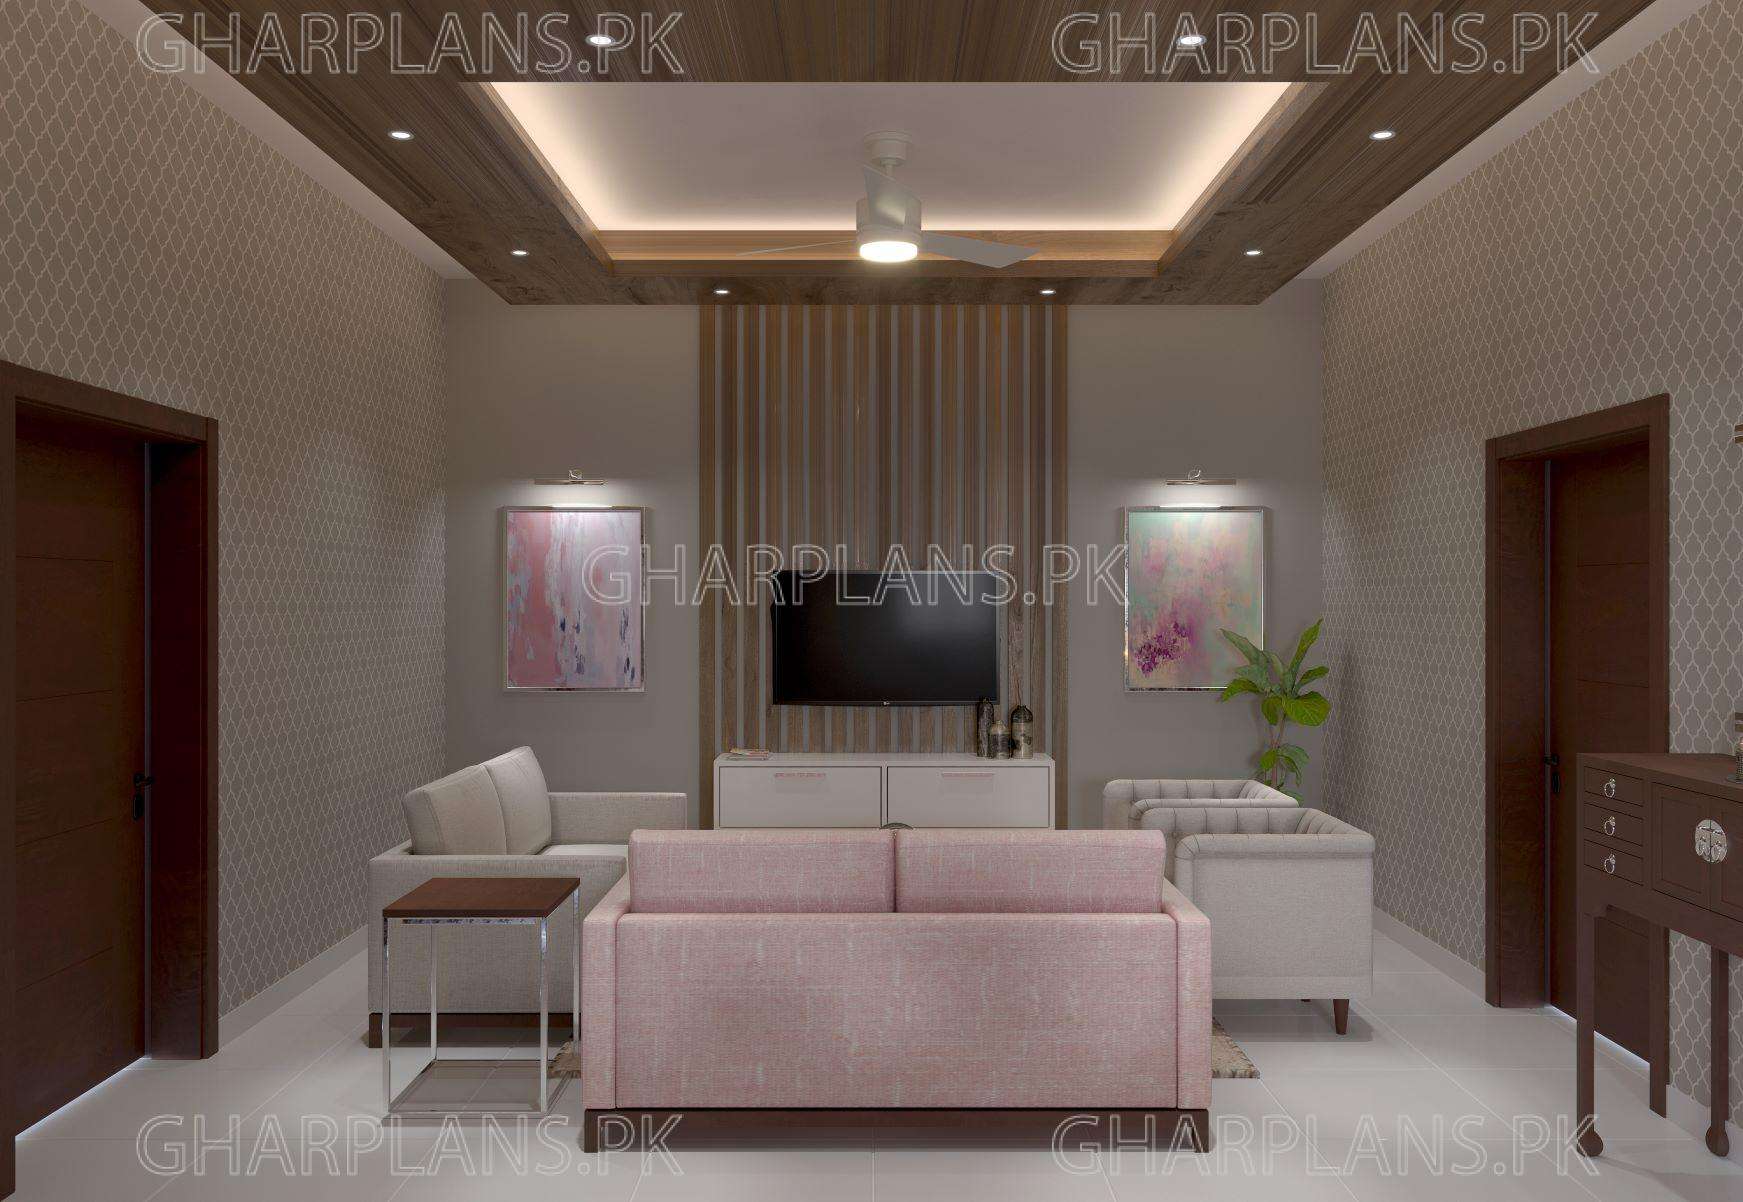 Ceiling and Media wall design